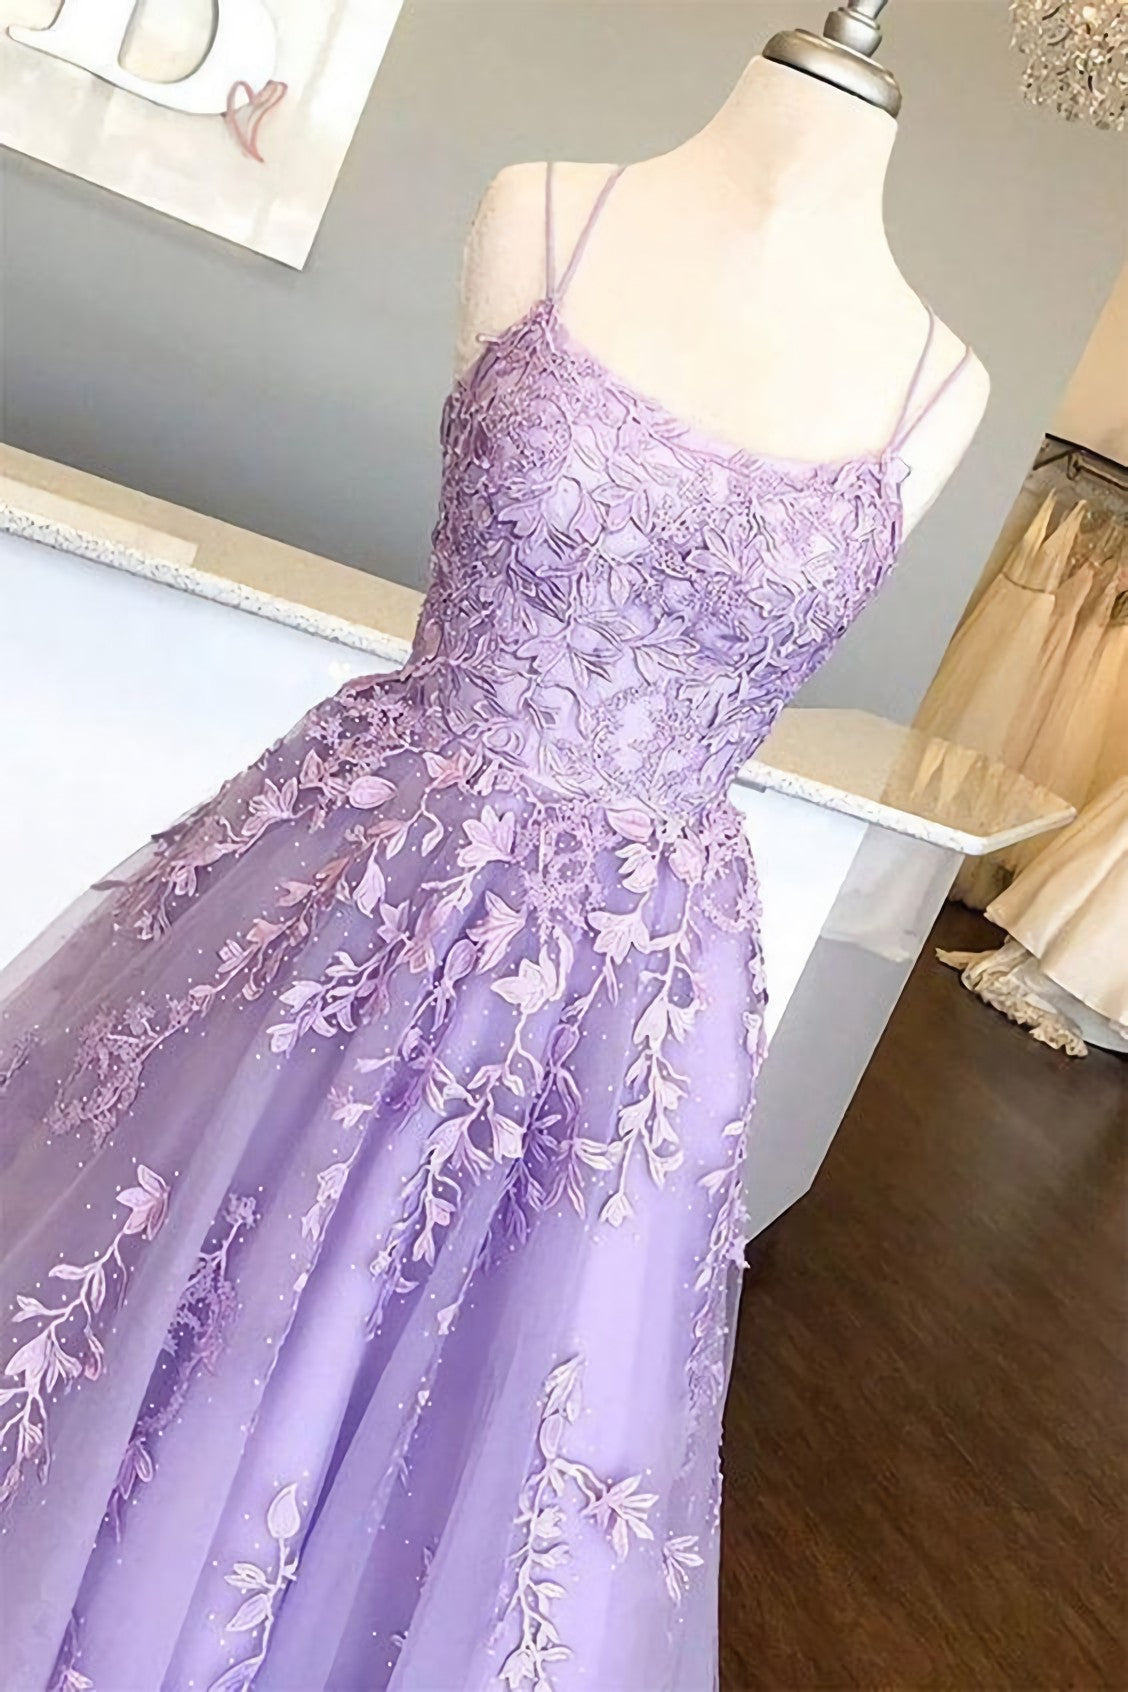 Lilac Corset Prom Dresses, With Appliques Long Princess Corset Prom Dress, Corset Prom Dance Dress, Corset Formal Corset Prom Dress outfits, Prom Dress Short